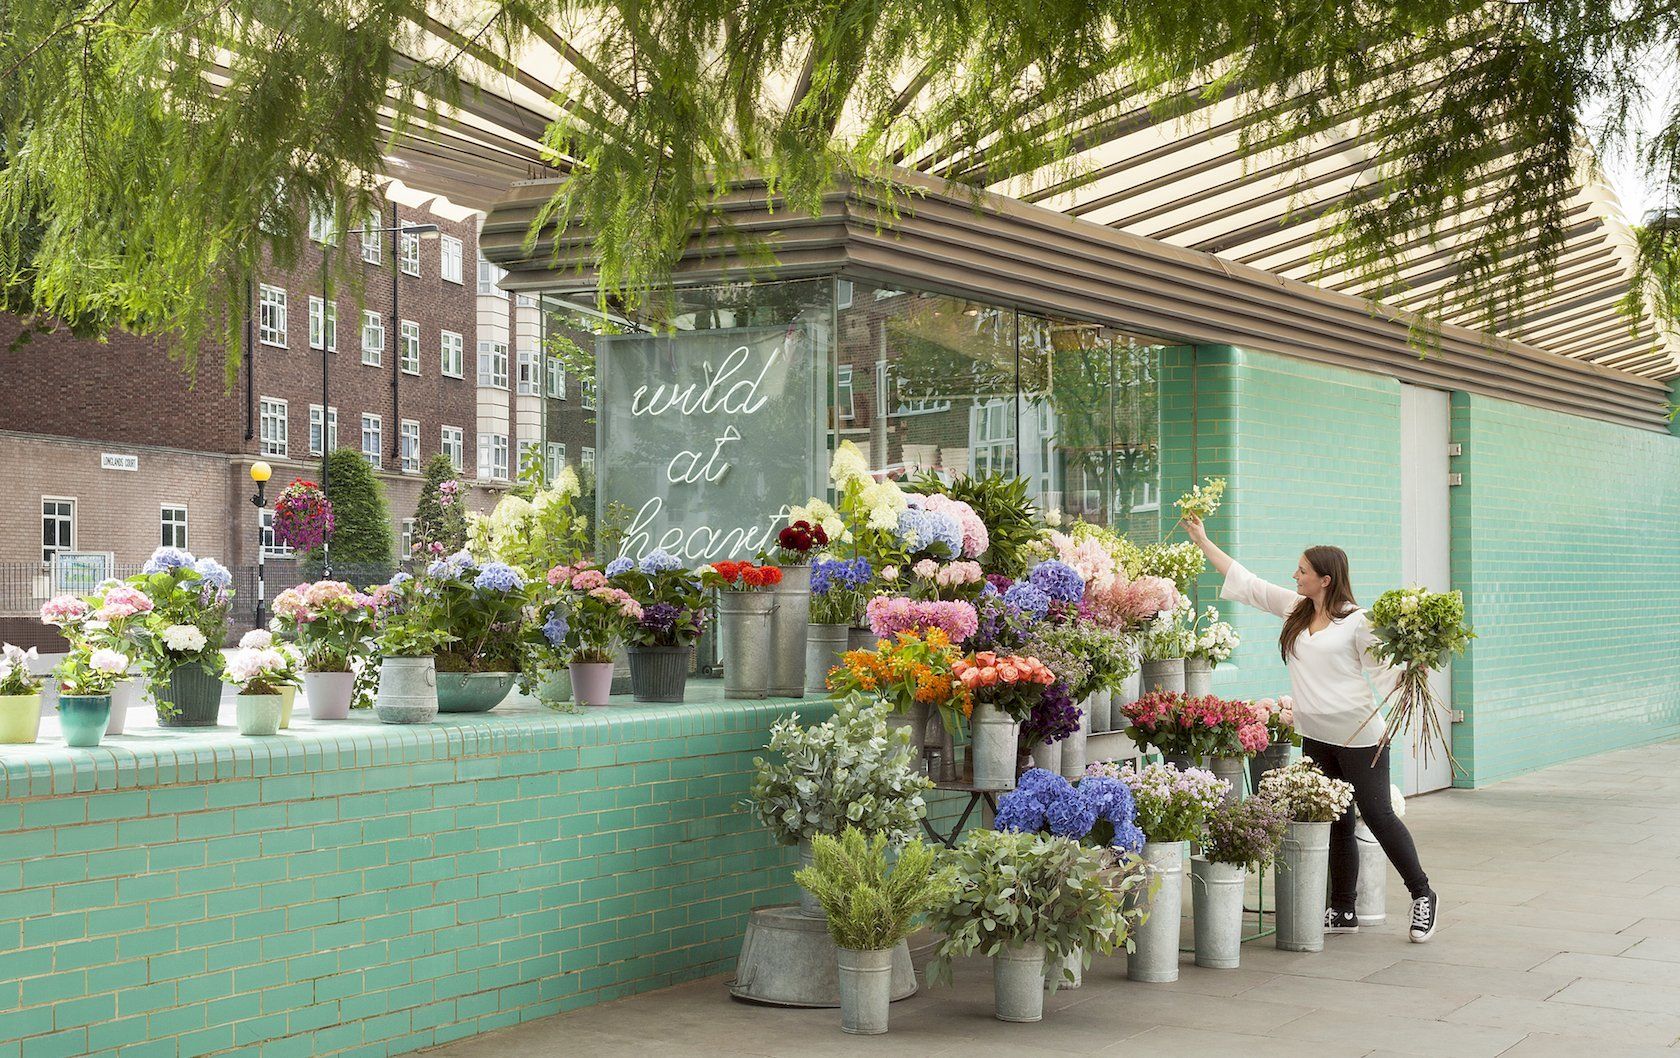 London’s prettiest storefronts by London Perfect